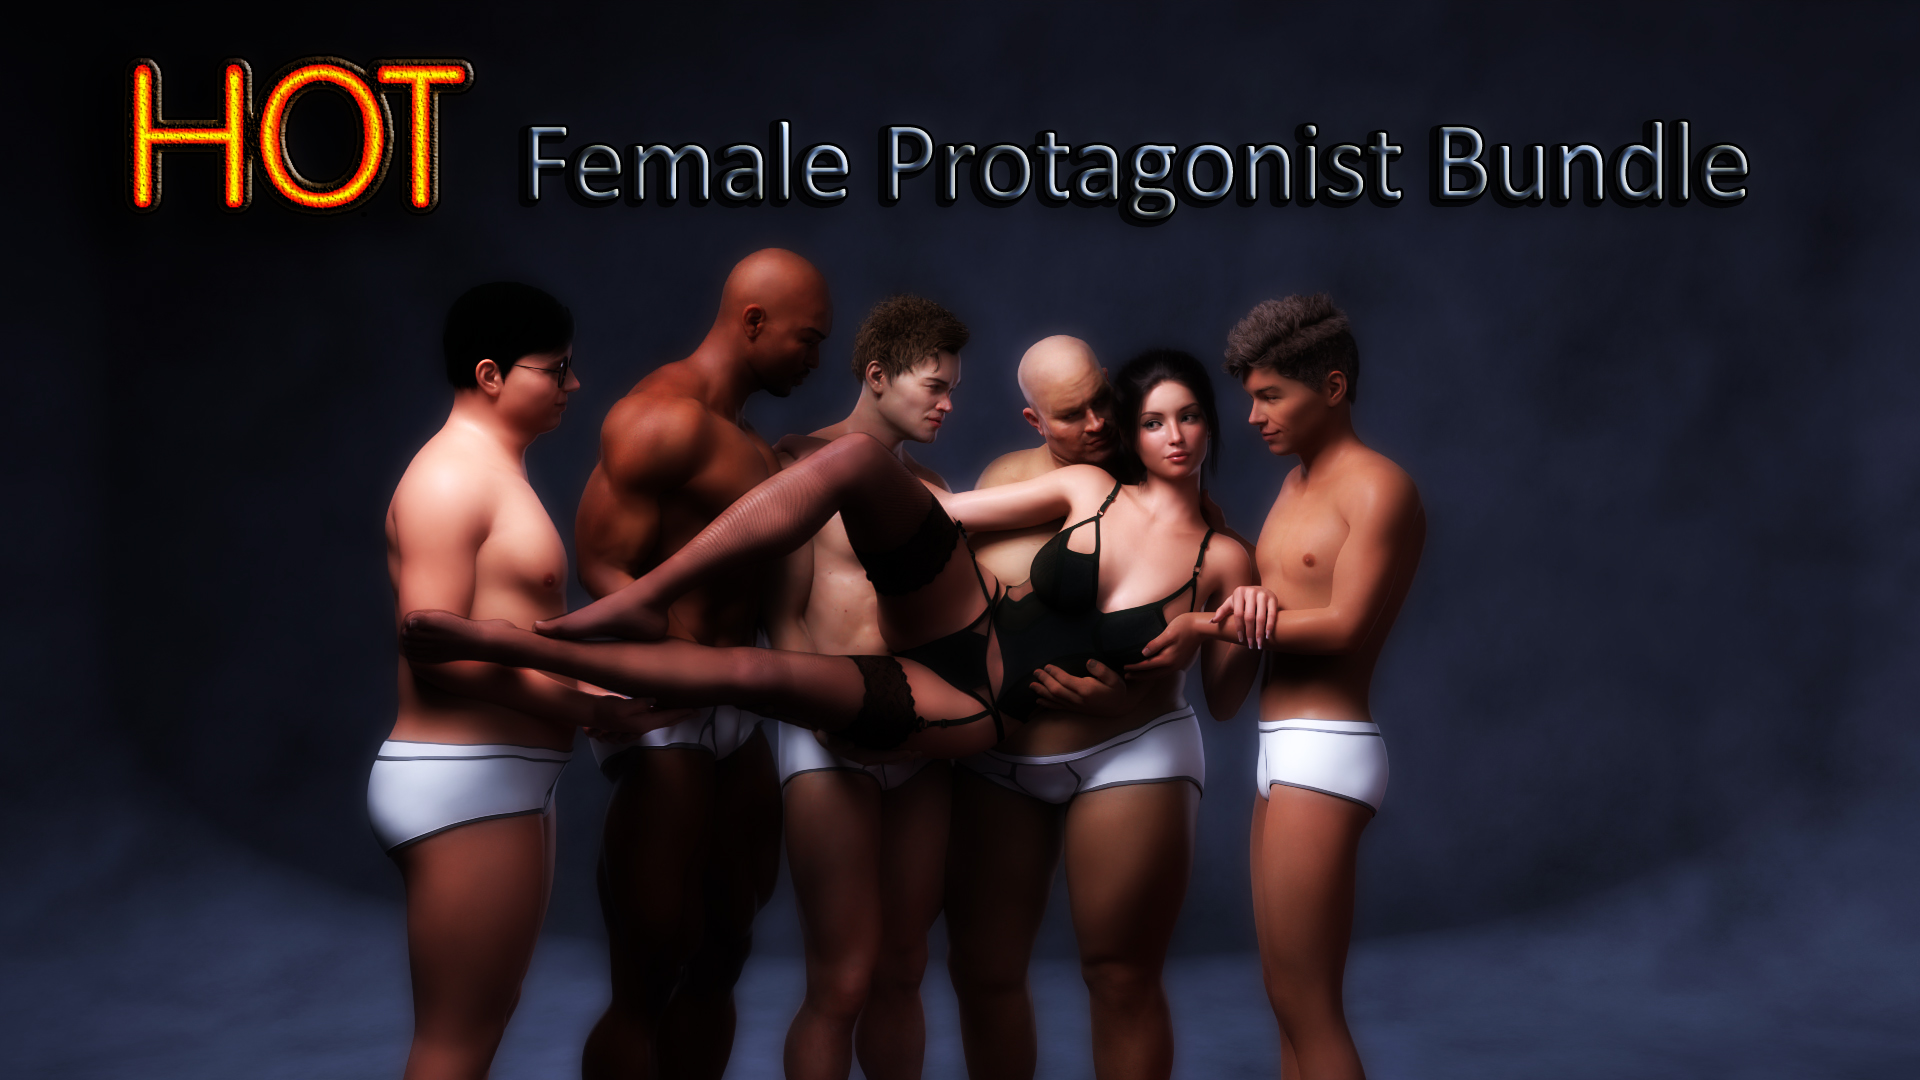 Hot Female Protagonist Bundle by Lustful Fantasy and 8 others - itch.io